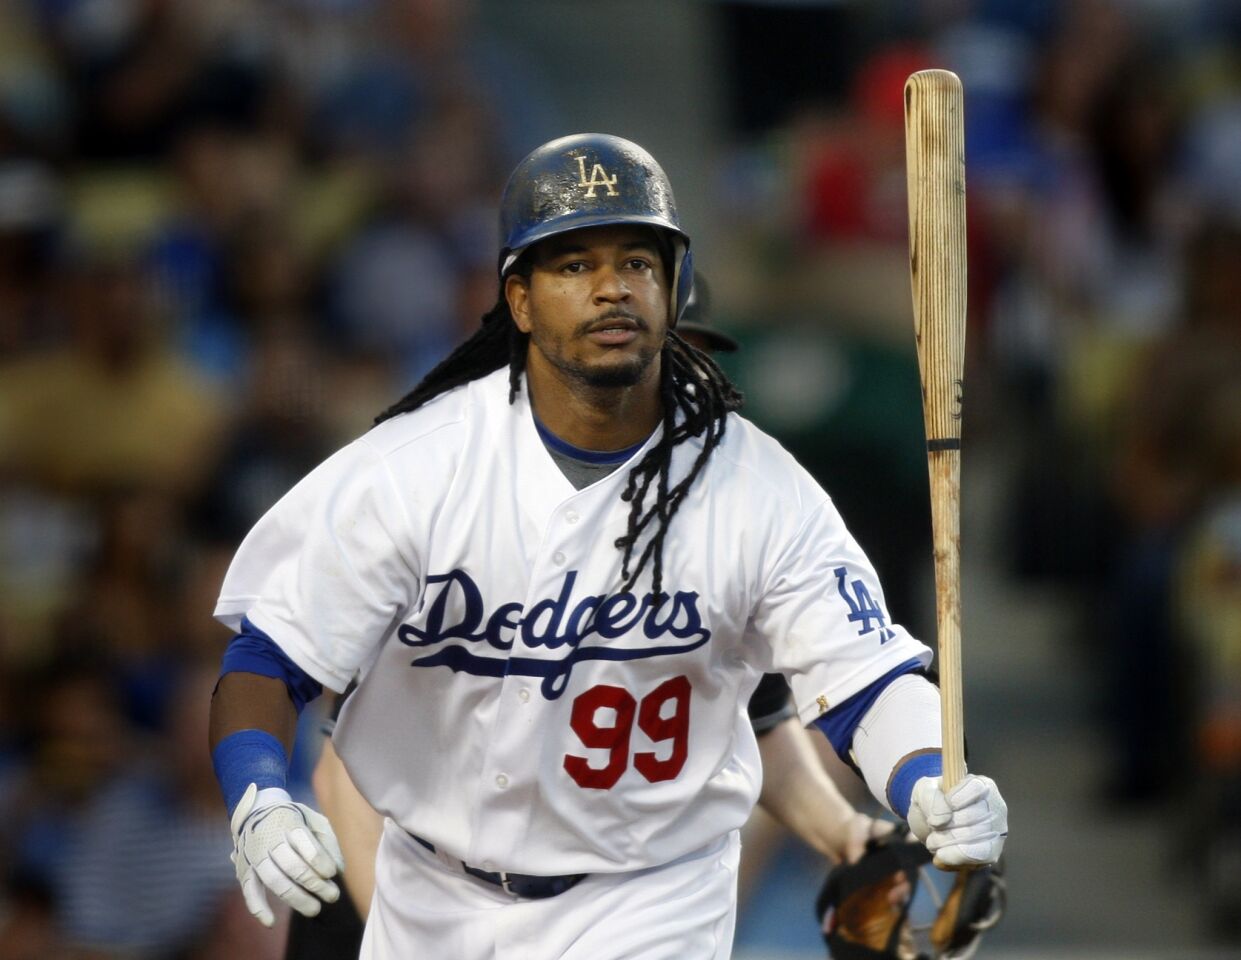 Dodgers slugger Manny Ramirez was suspended 50 games in May 2009 for violating baseball's drug policy. While with the Tampa Bay Rays in 2011, Ramirez avoided a 100-game suspension when he abruptly retired following another drug policy violation.